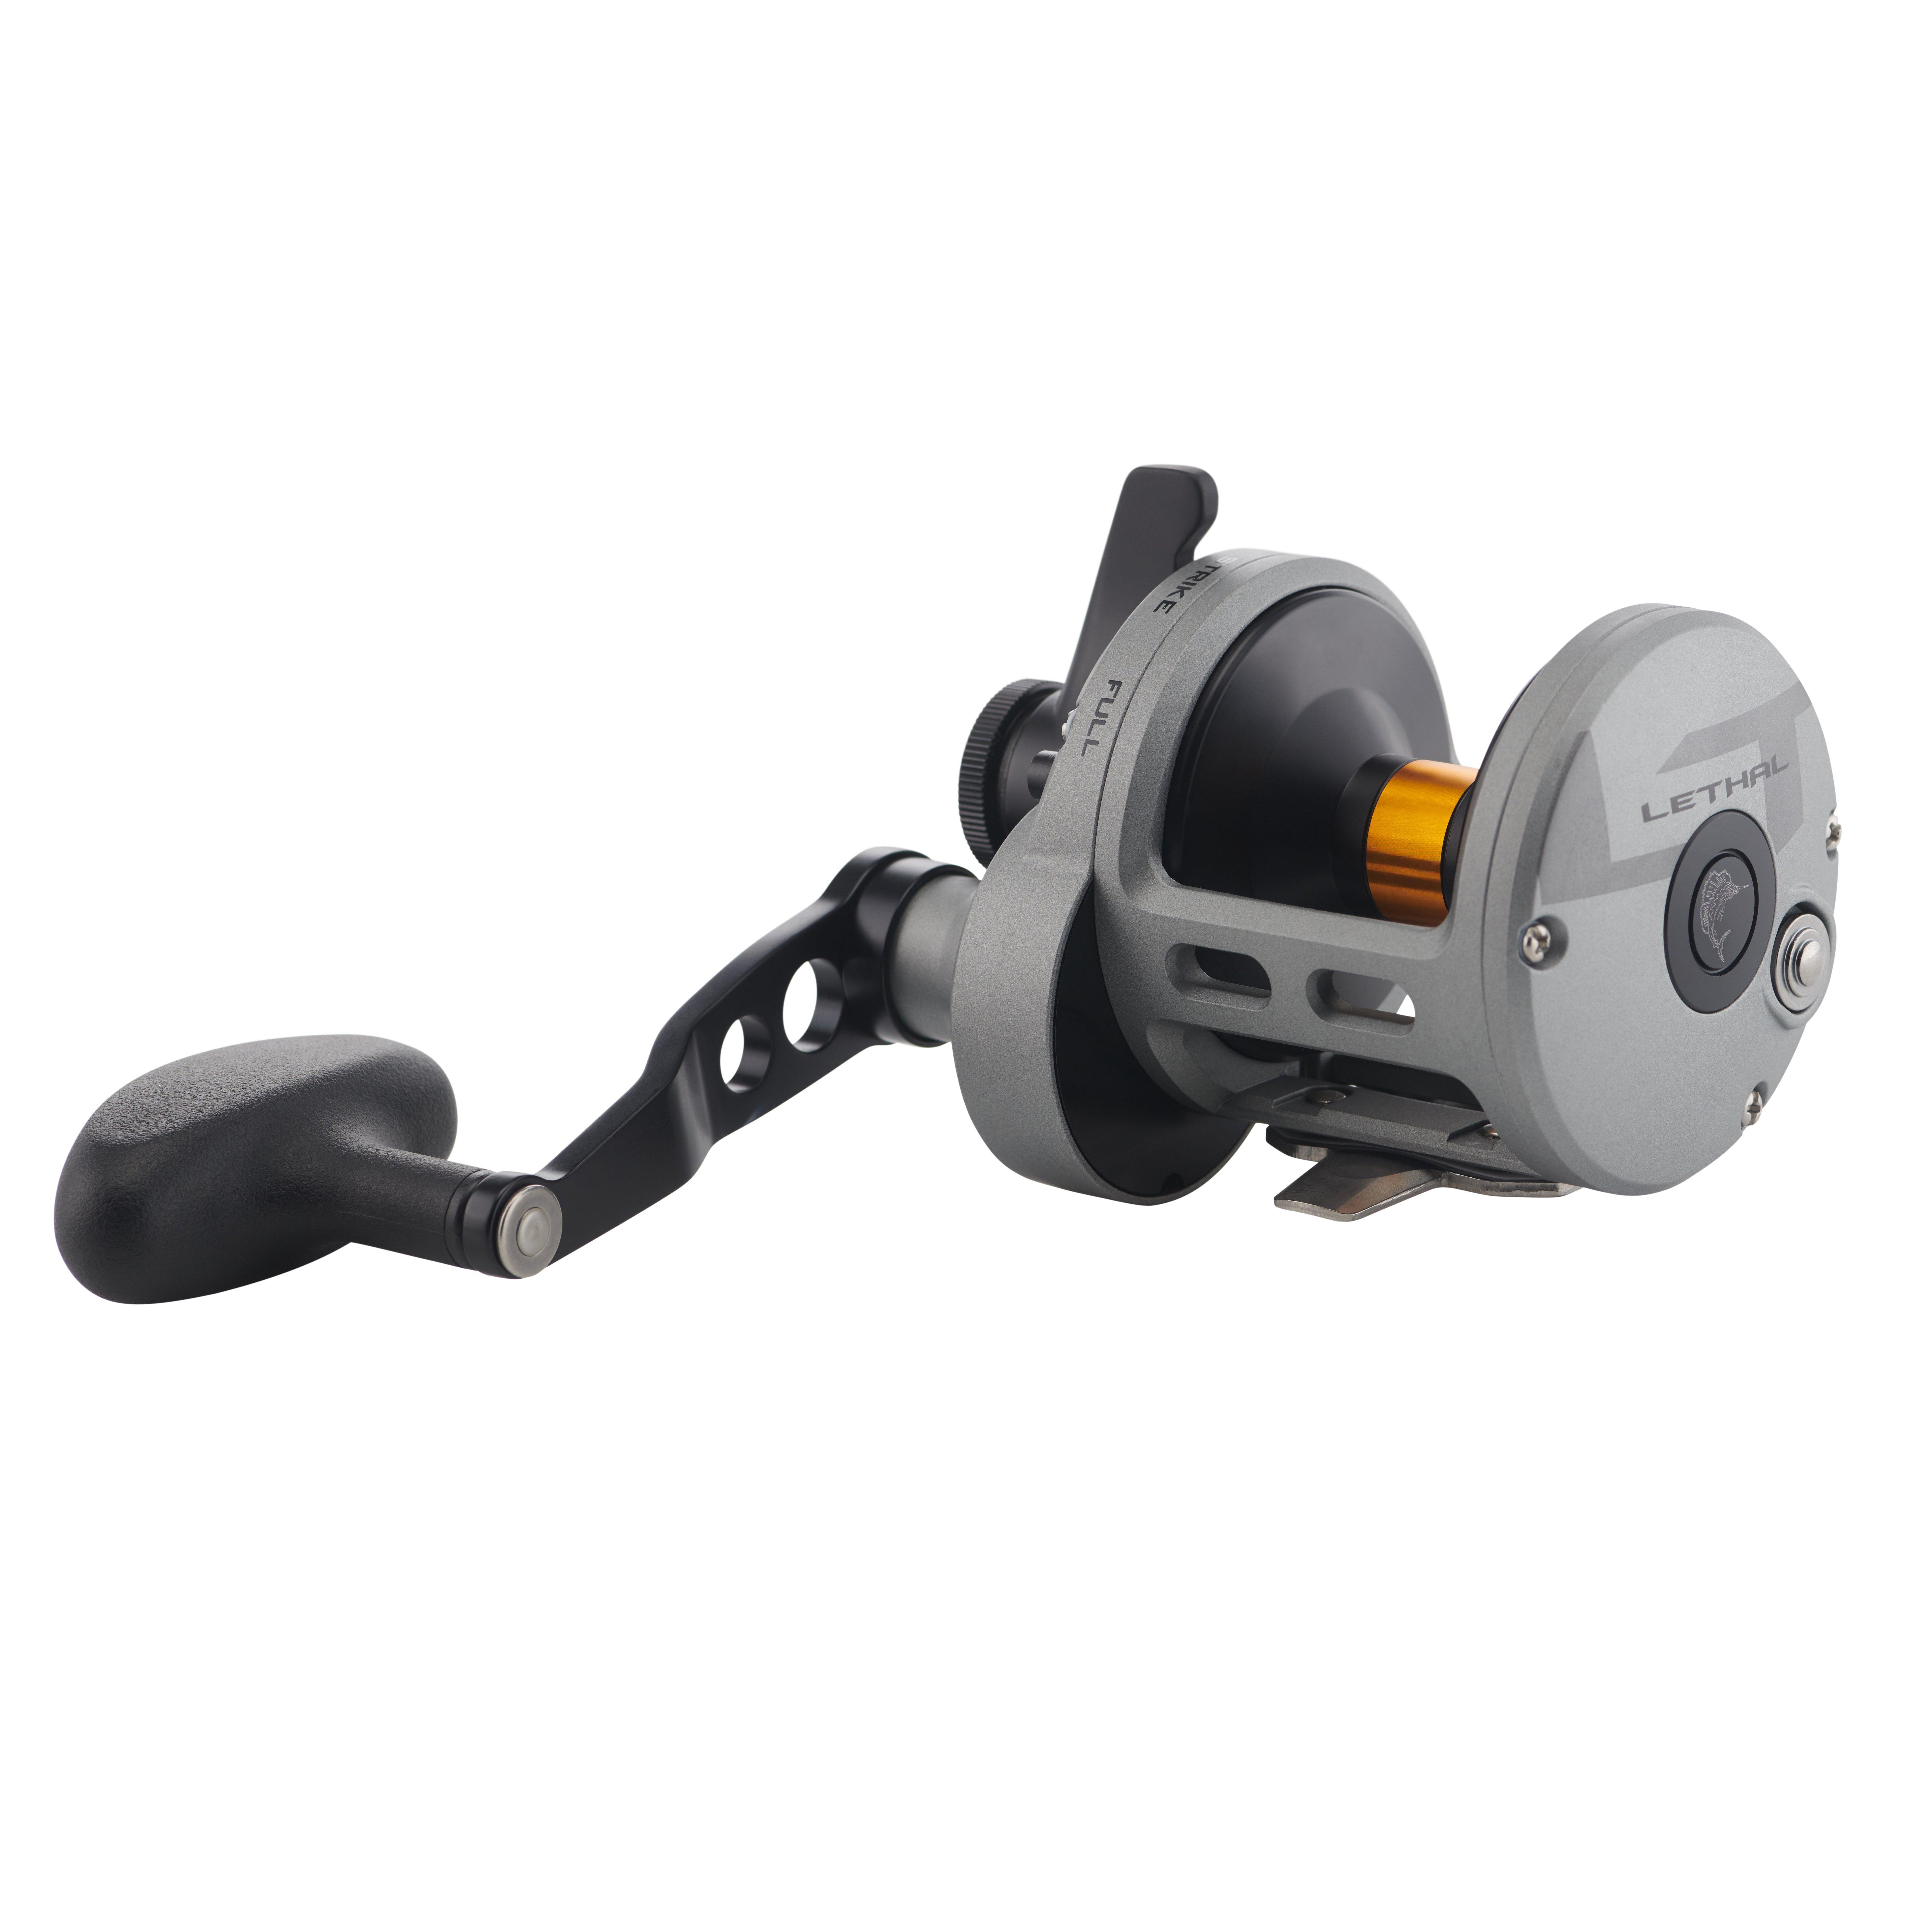 Fin-Nor Lethal LTL30 2 Speed OH Lever Drag Overhead Fishing Reel Free Line